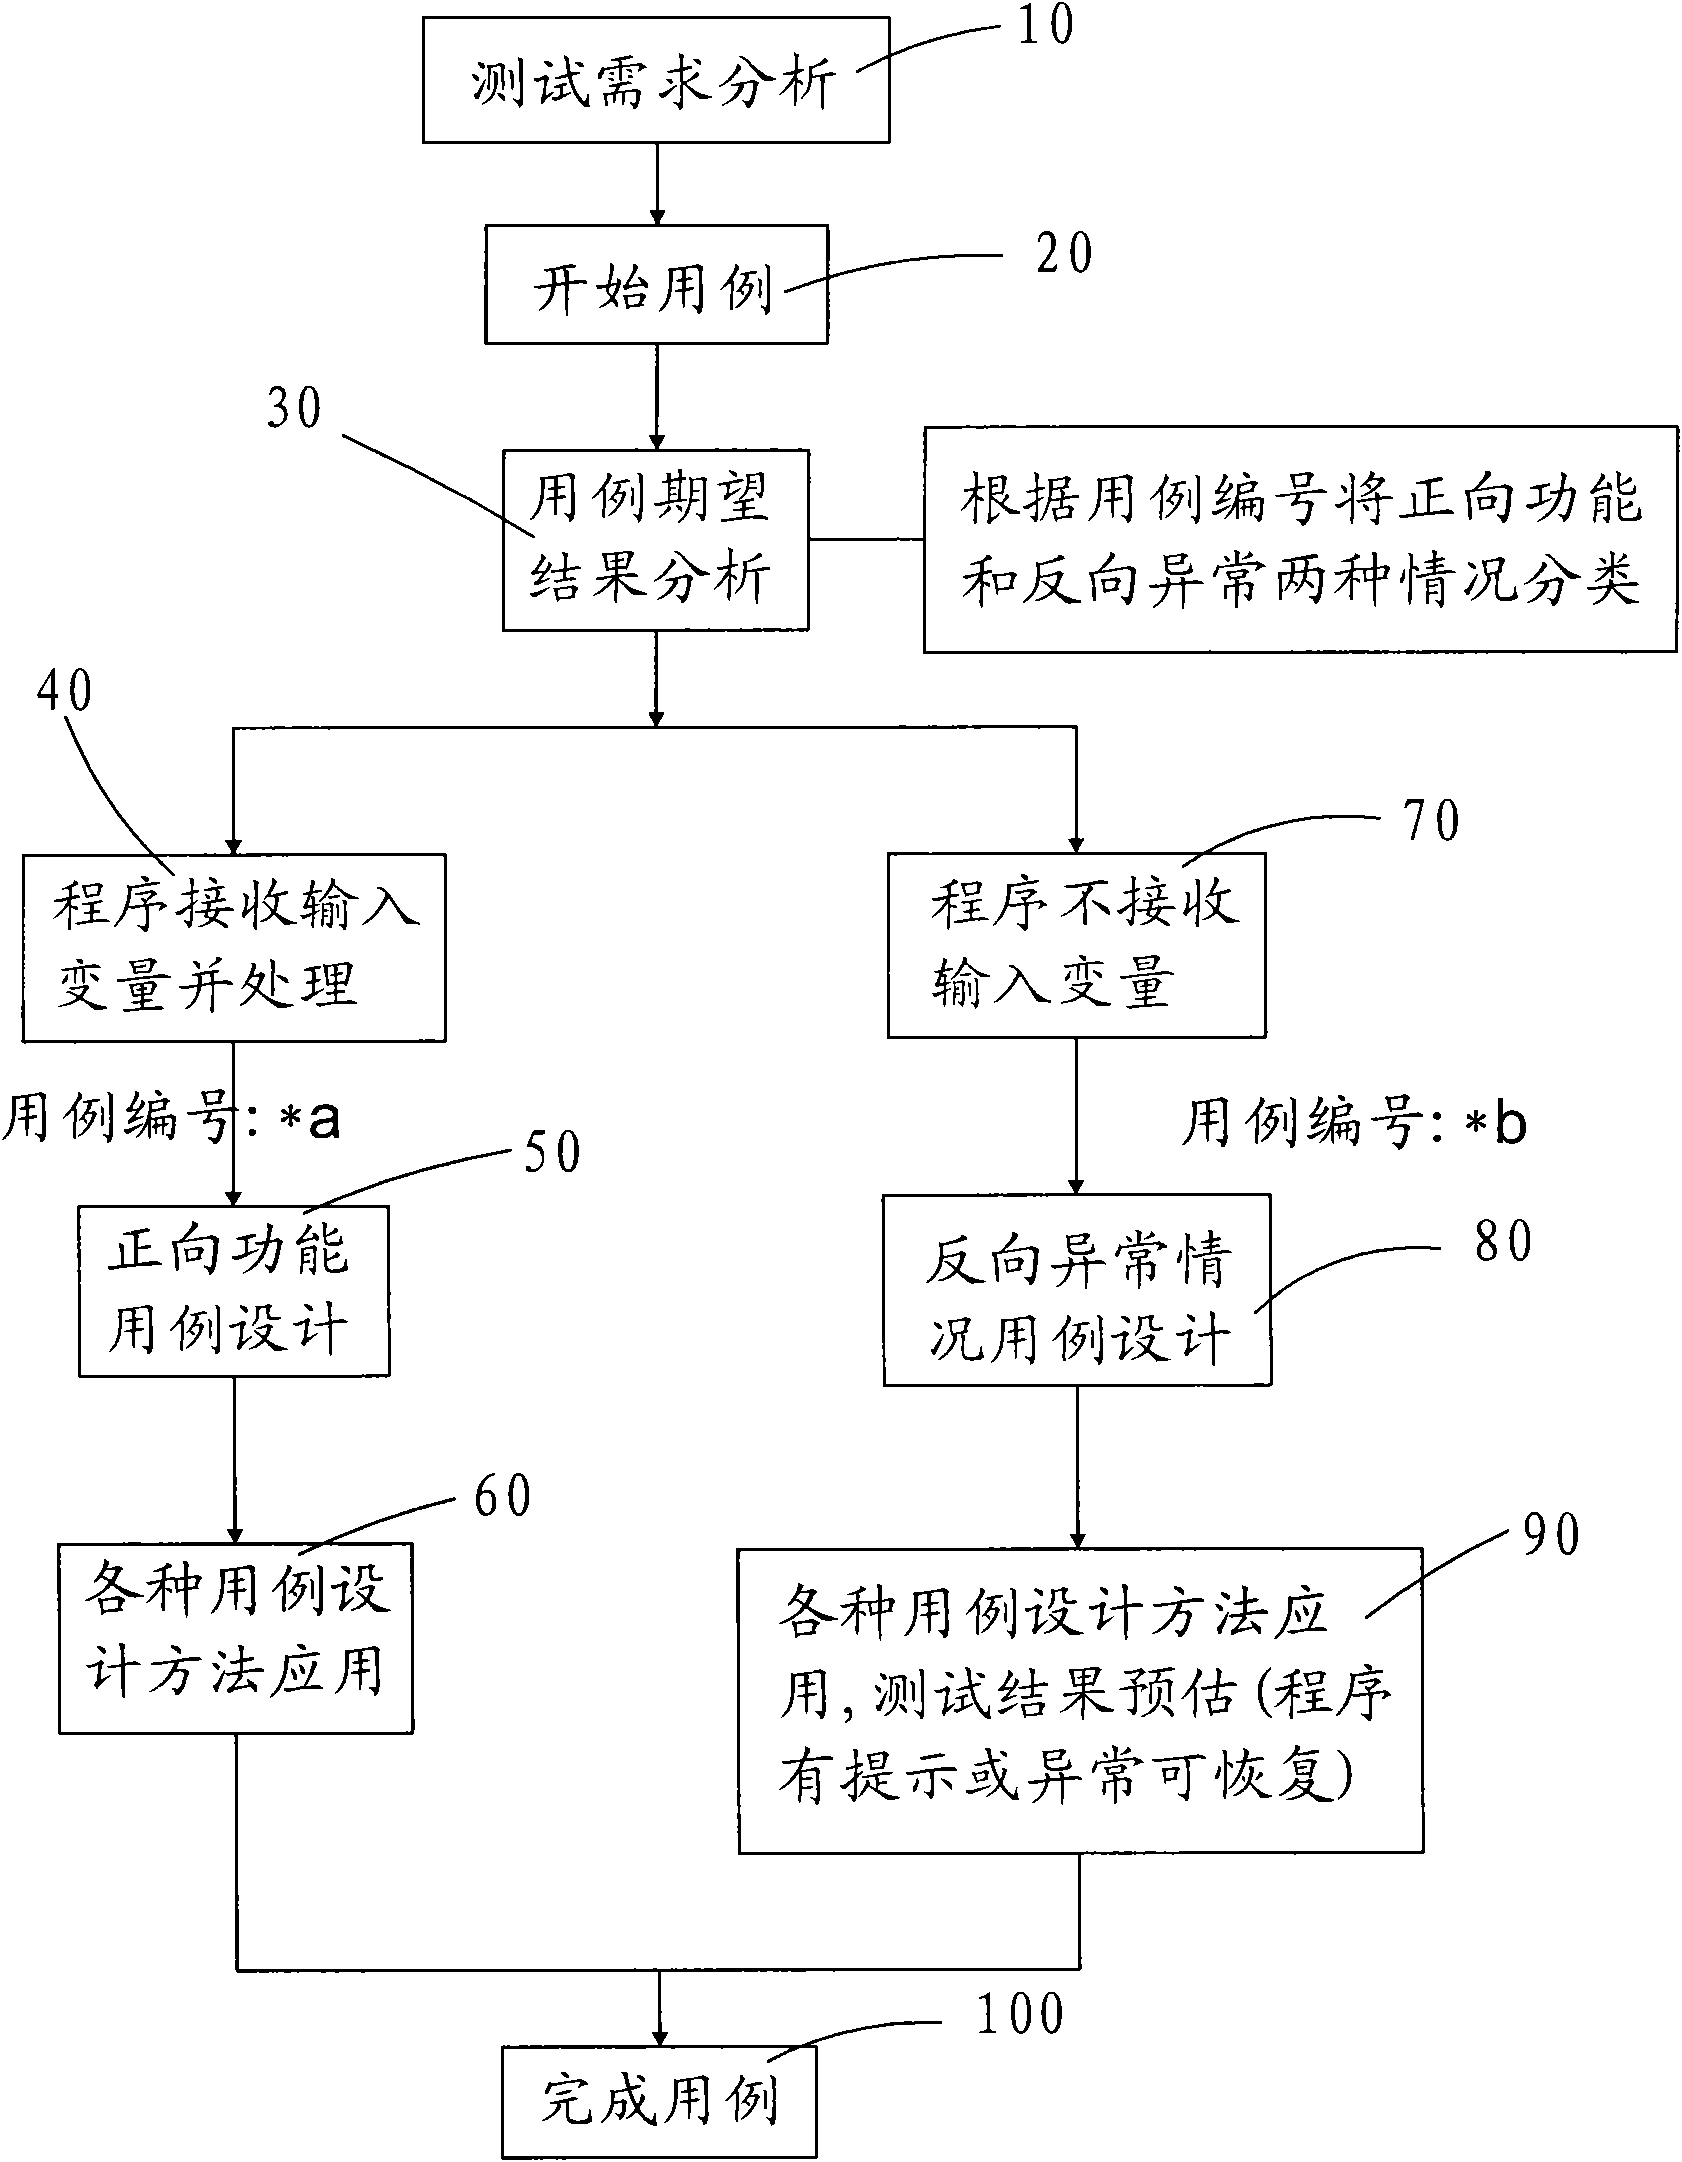 Designing method of high-efficiency high-coverage-rate function test case